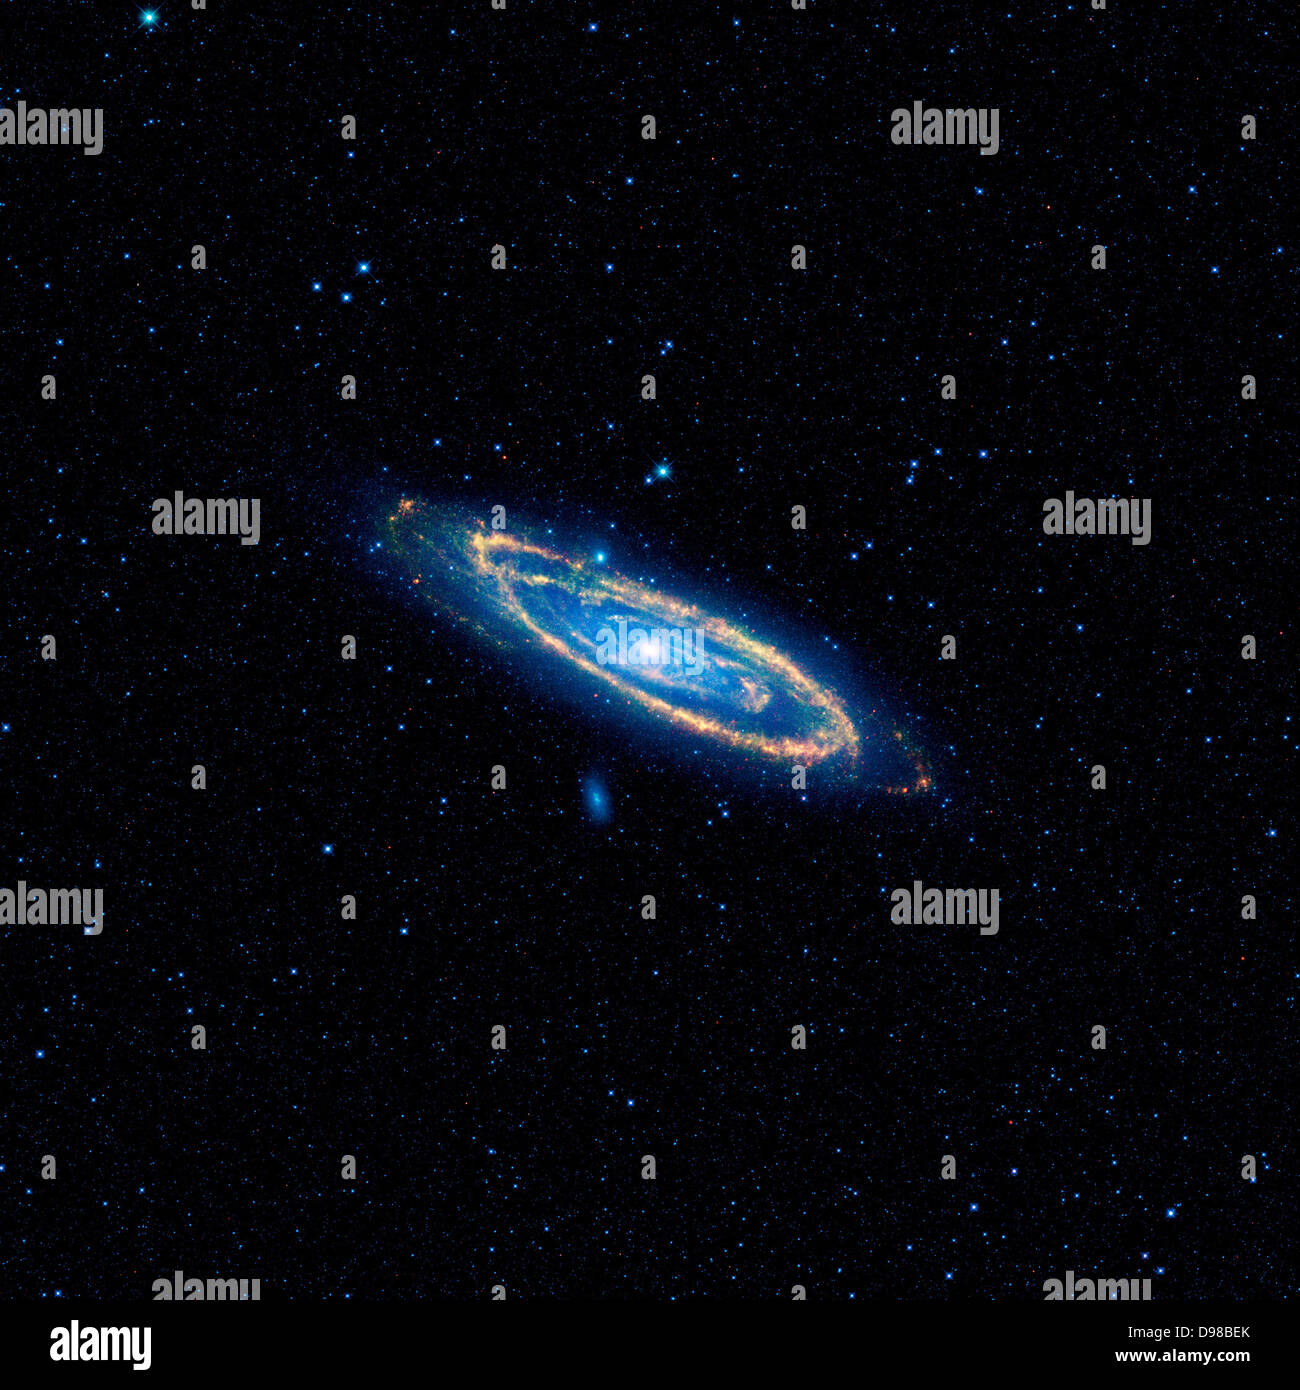 The immense Andromeda galaxy, also known as Messier 31 or simply M31, is captured in full in this new image from NASA's Stock Photo